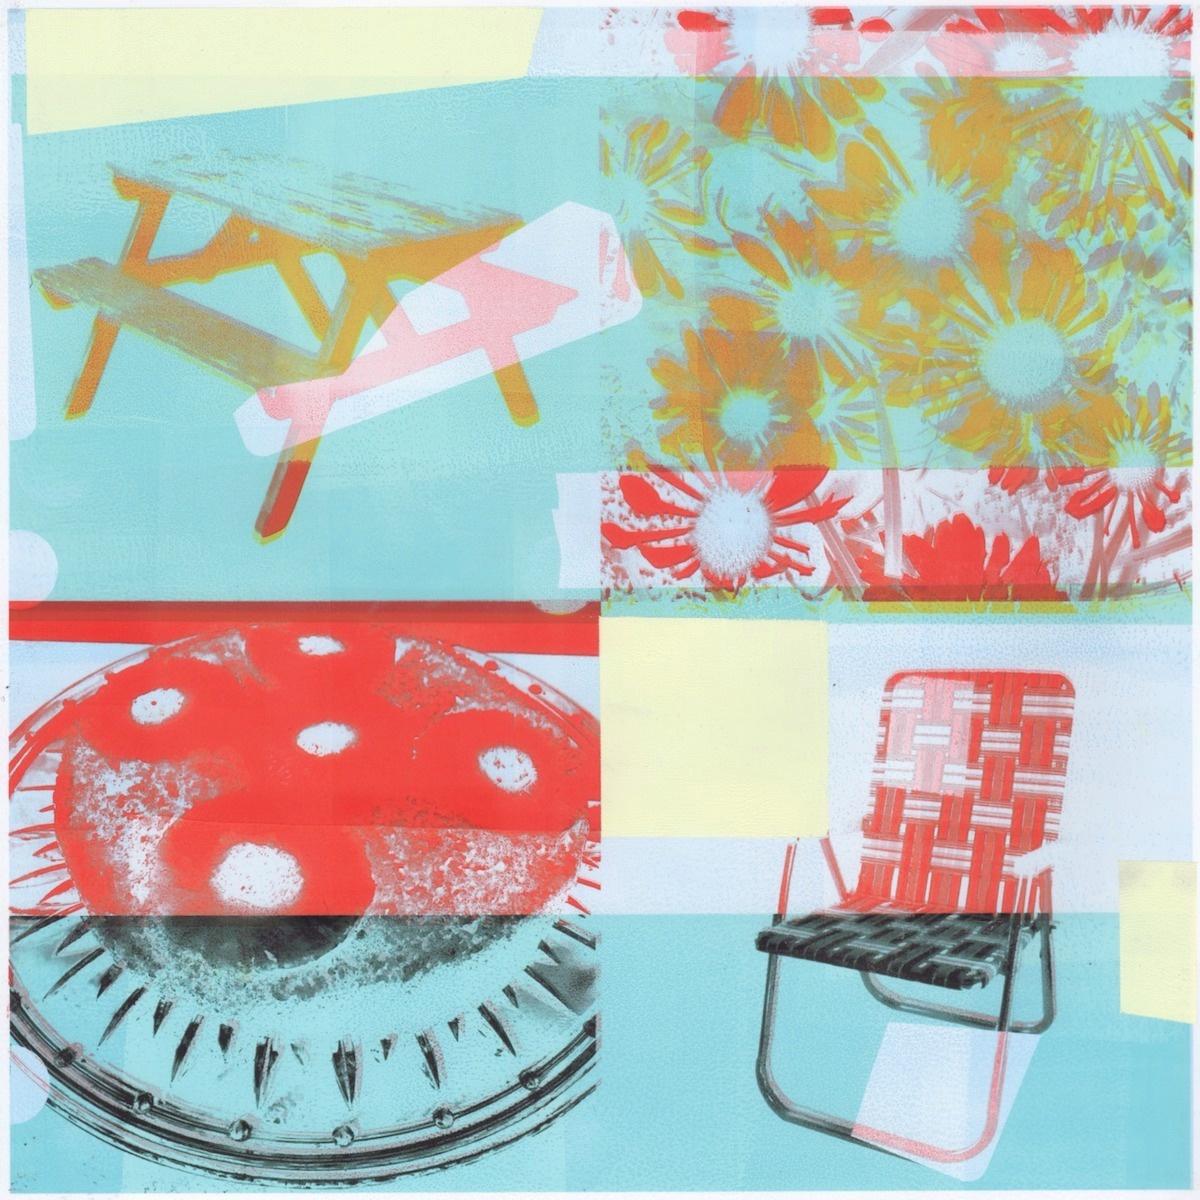 "Picnic", contemporary, flowers, cake, red, yellow, blue, print, mixed media